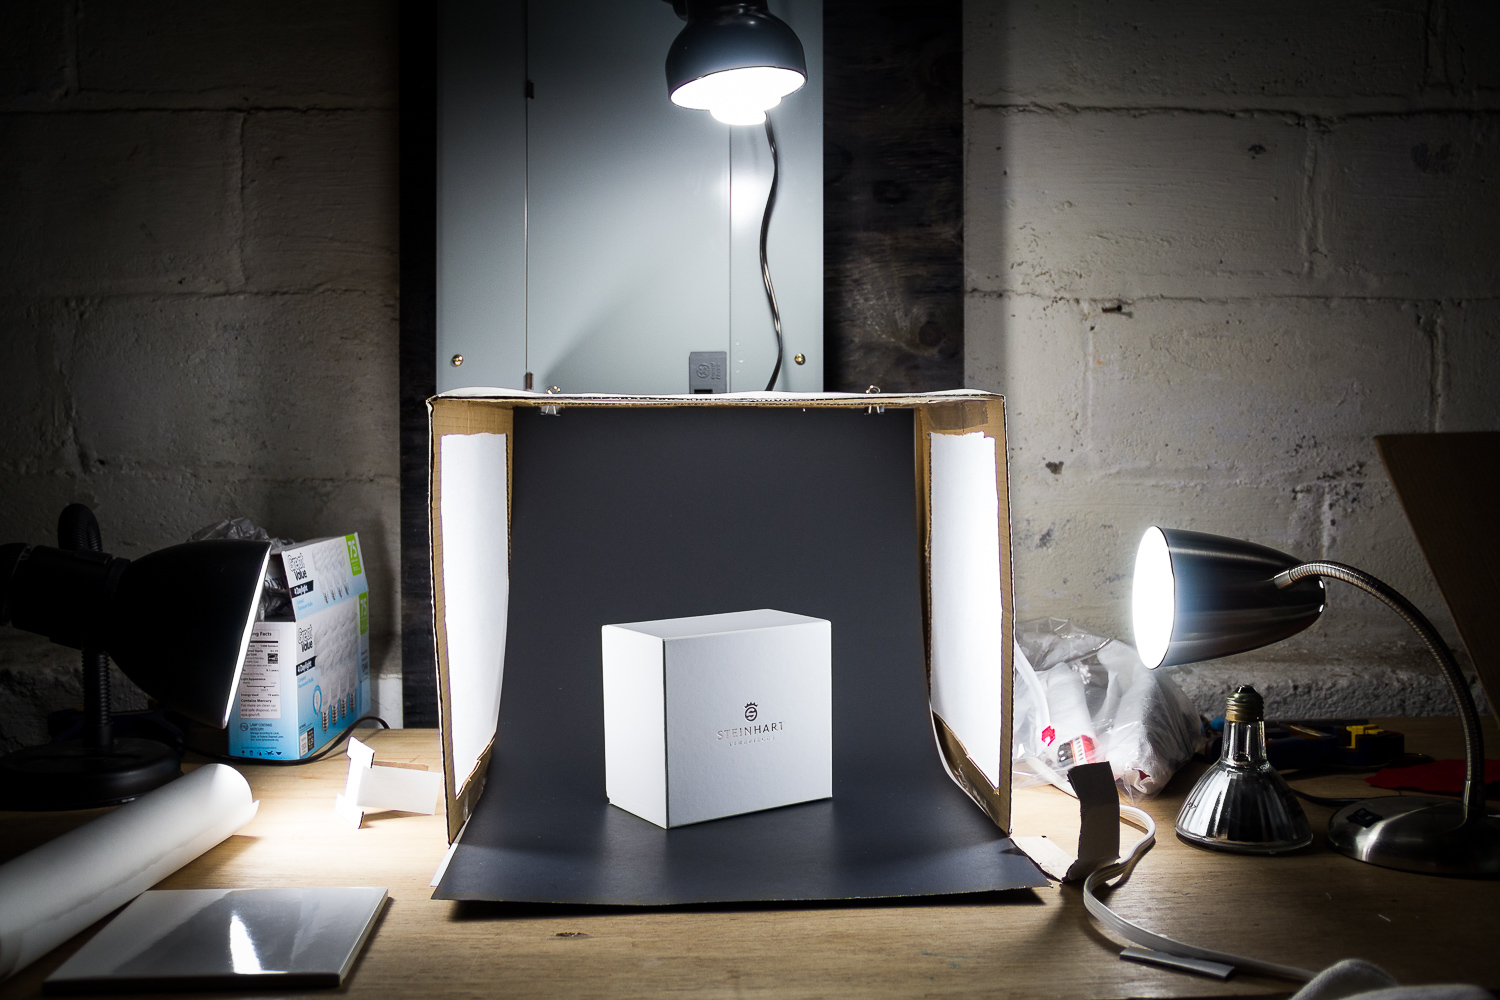 How to make your own light box for product photography